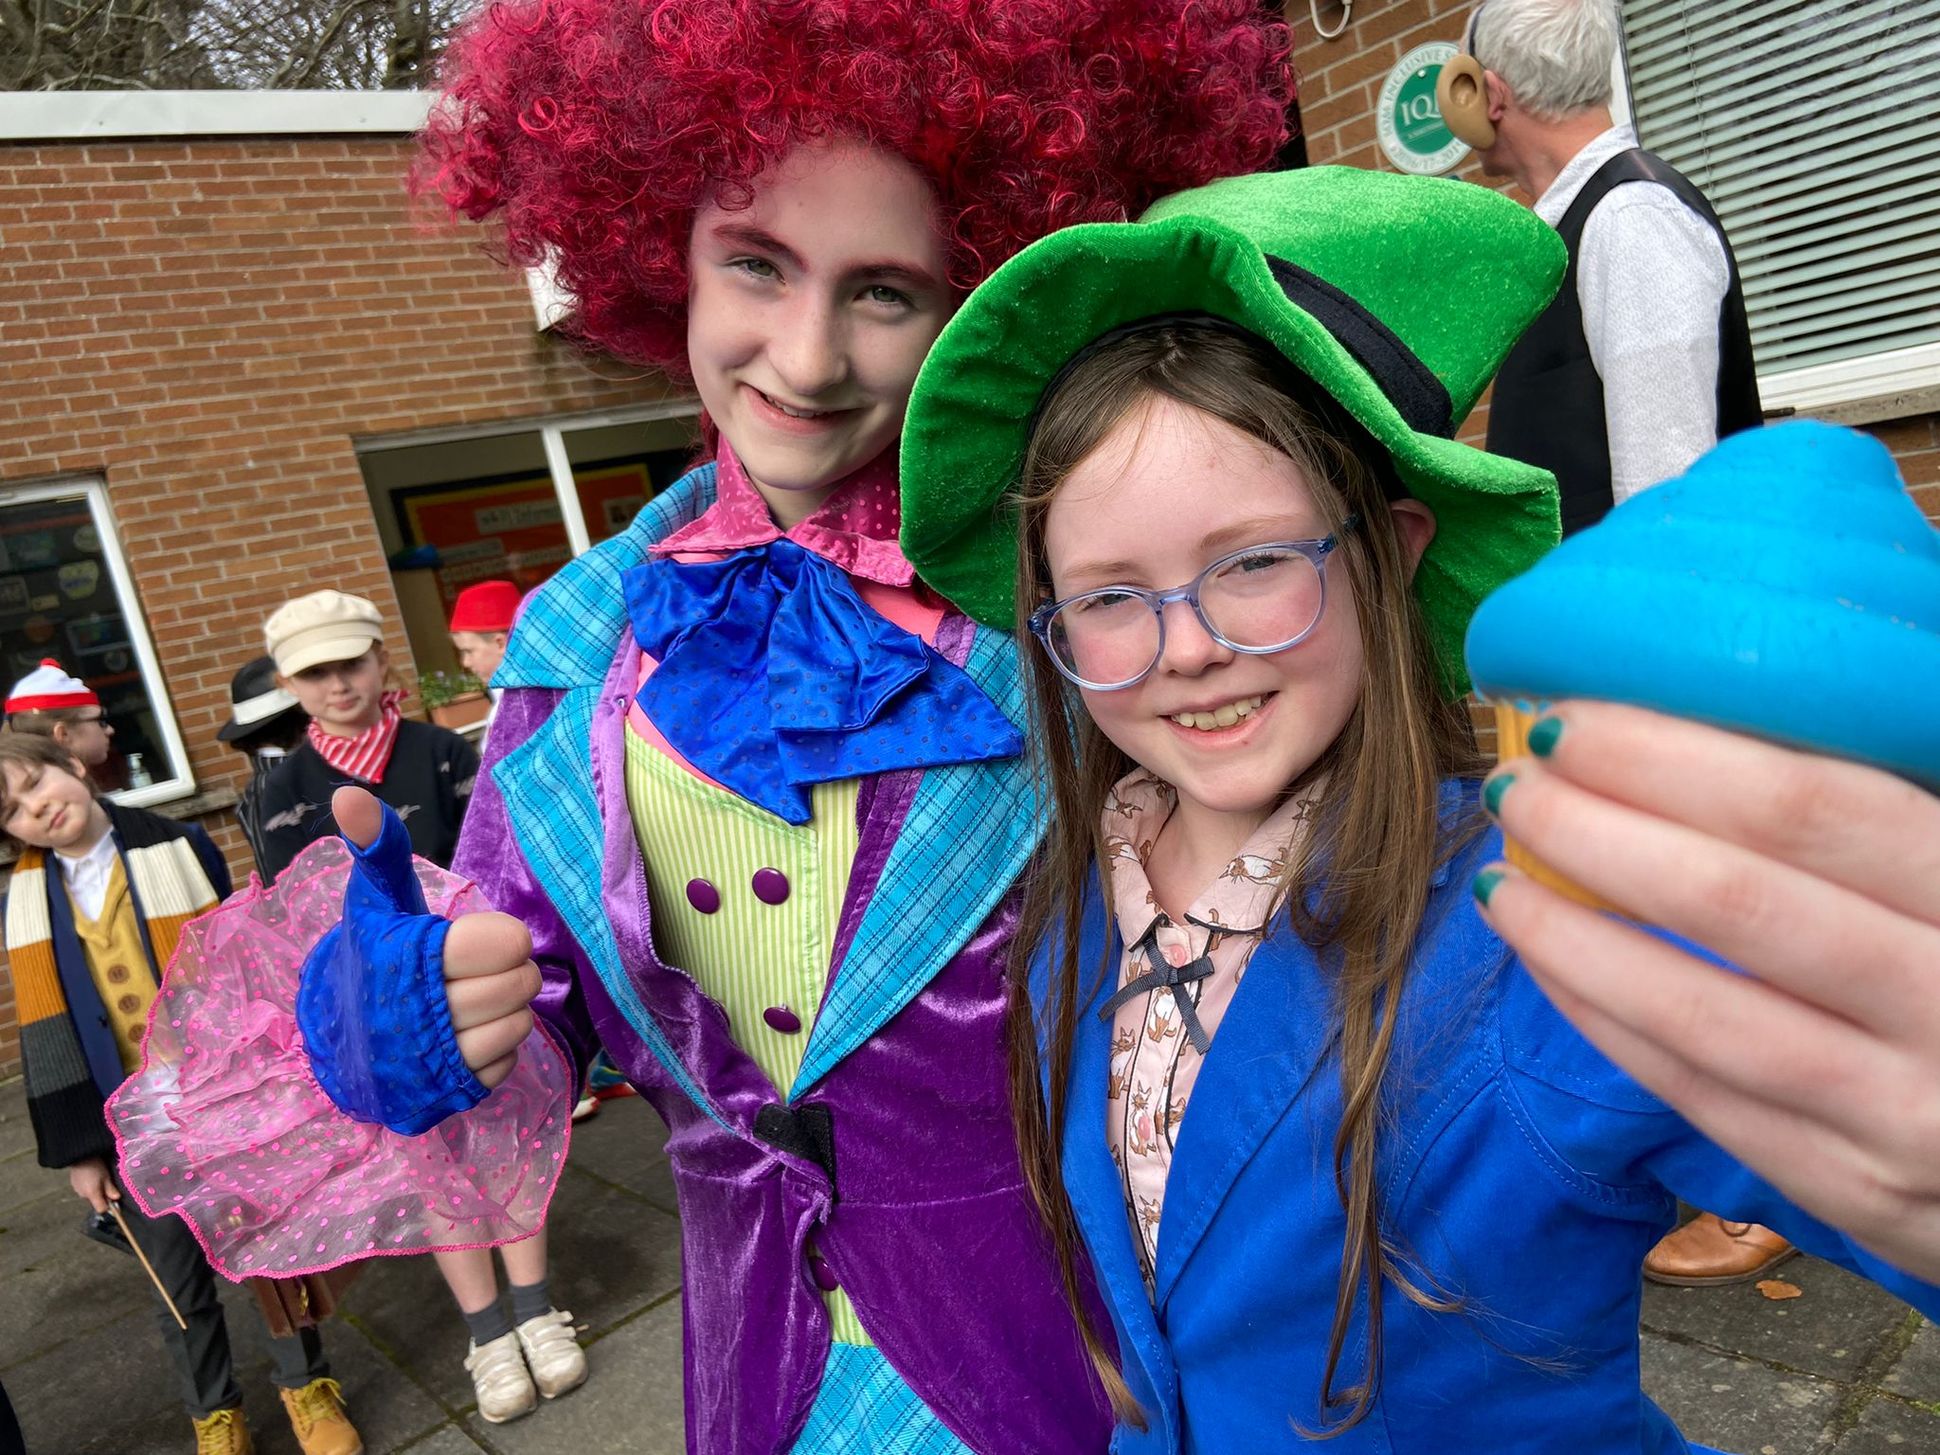 MAD AS A HATTER: Leah and Mary took a trip to wonderland on their way to school this morning